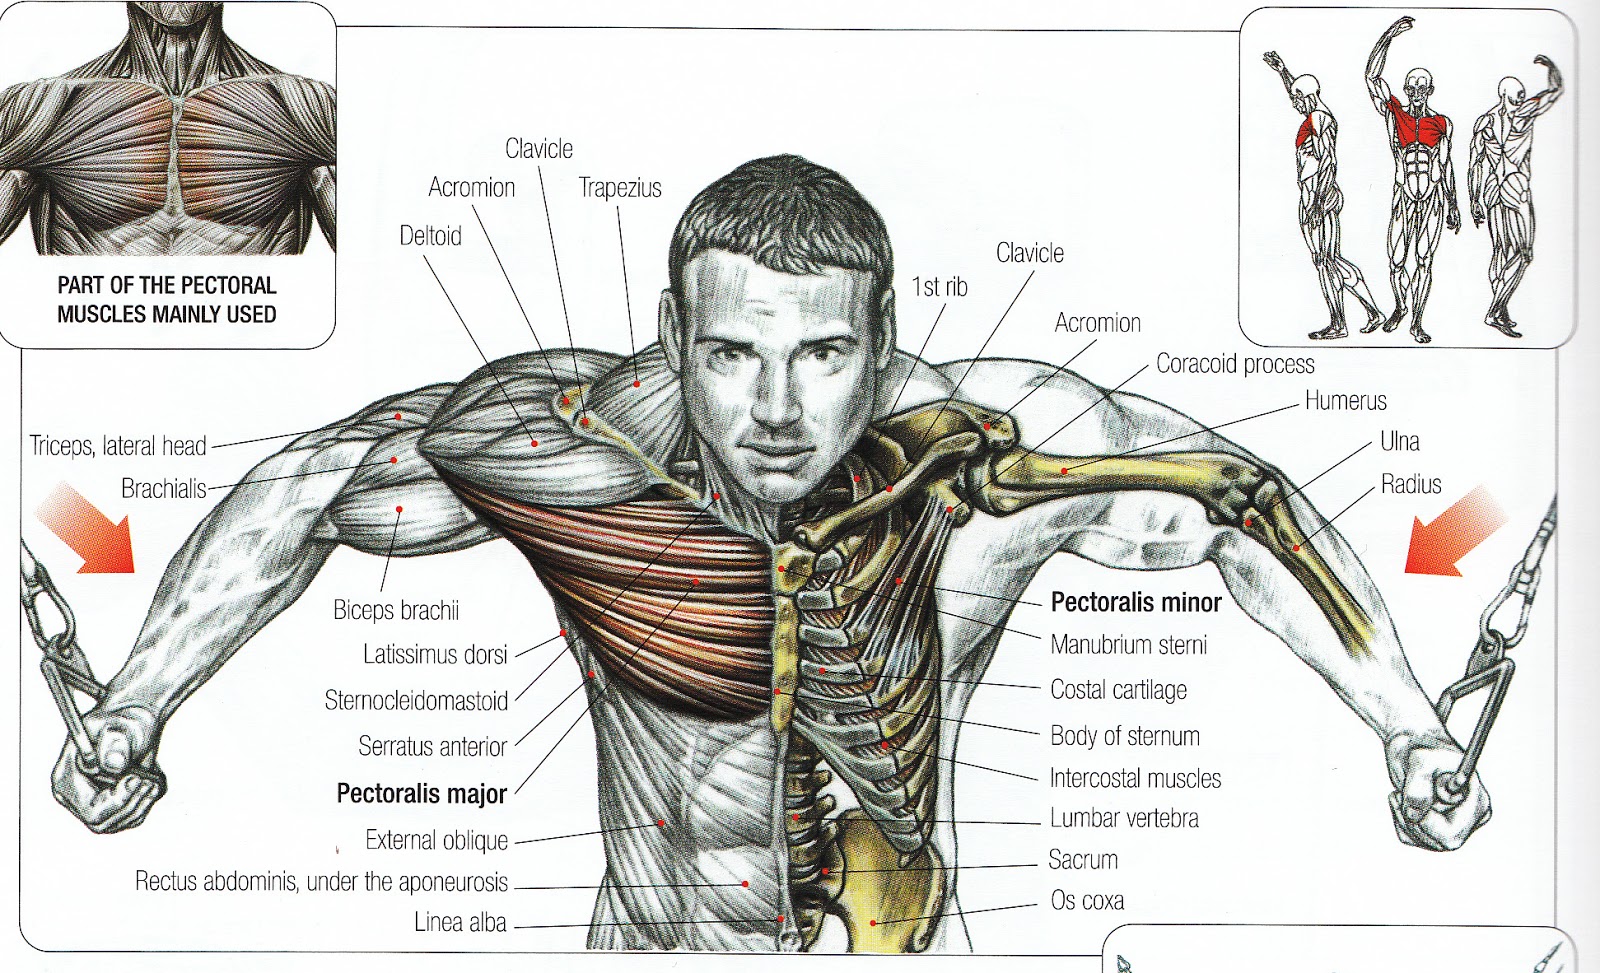 Top 7 Chest Exercises To Build Muscle